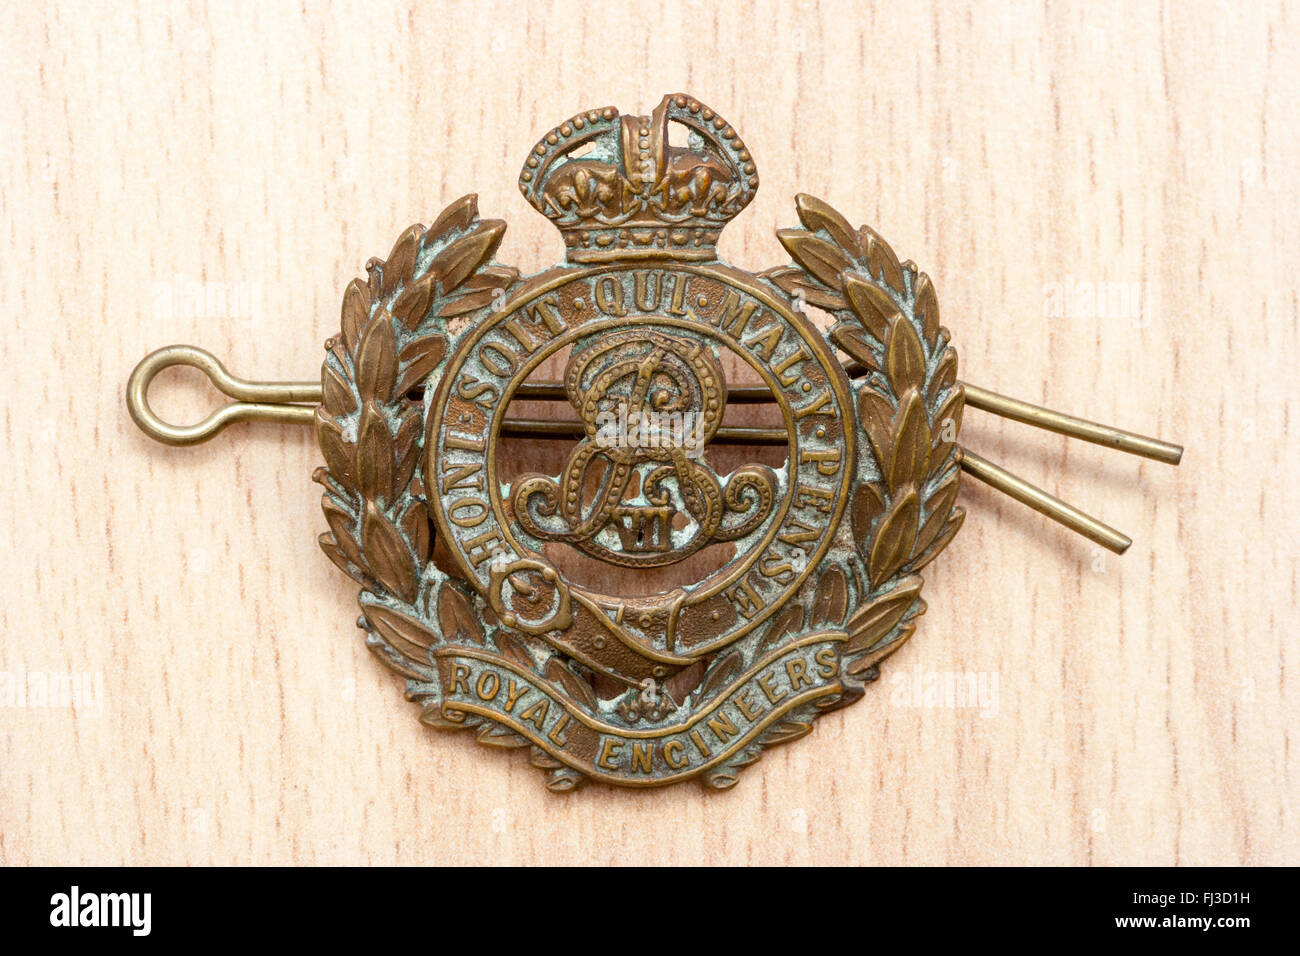 First world war, the great war. Regalia. rmy cap badge of the Royal Engineers against wood grain background. Stock Photo